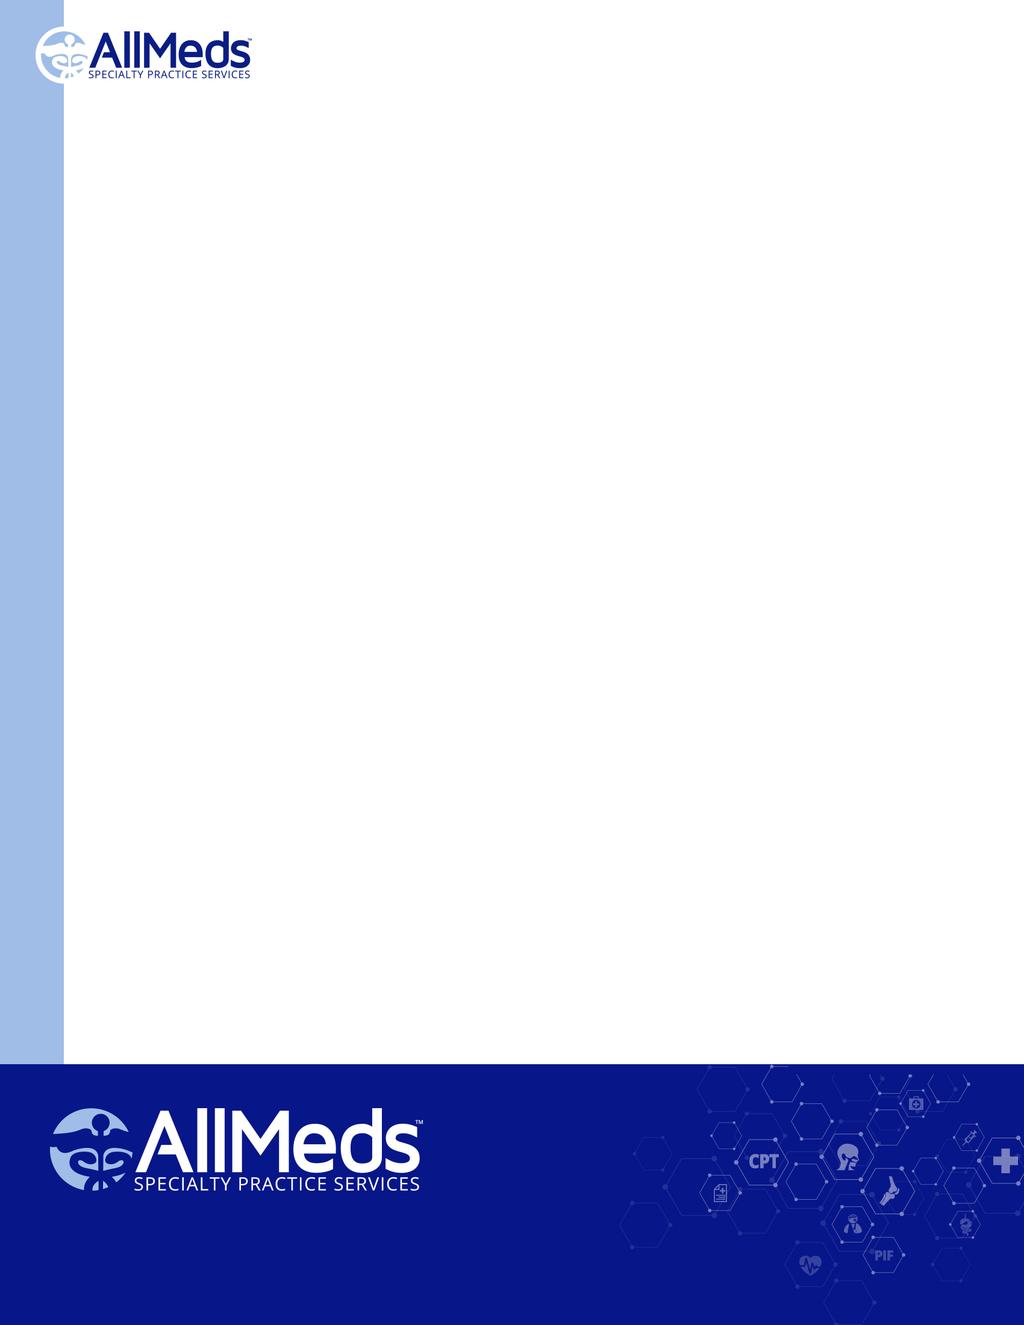 WhitePaper: Replacing Your Practice Manager Transform Challenges into Opportunities with AllMeds PM Digitization of PM tools is practical from a cost perspective.